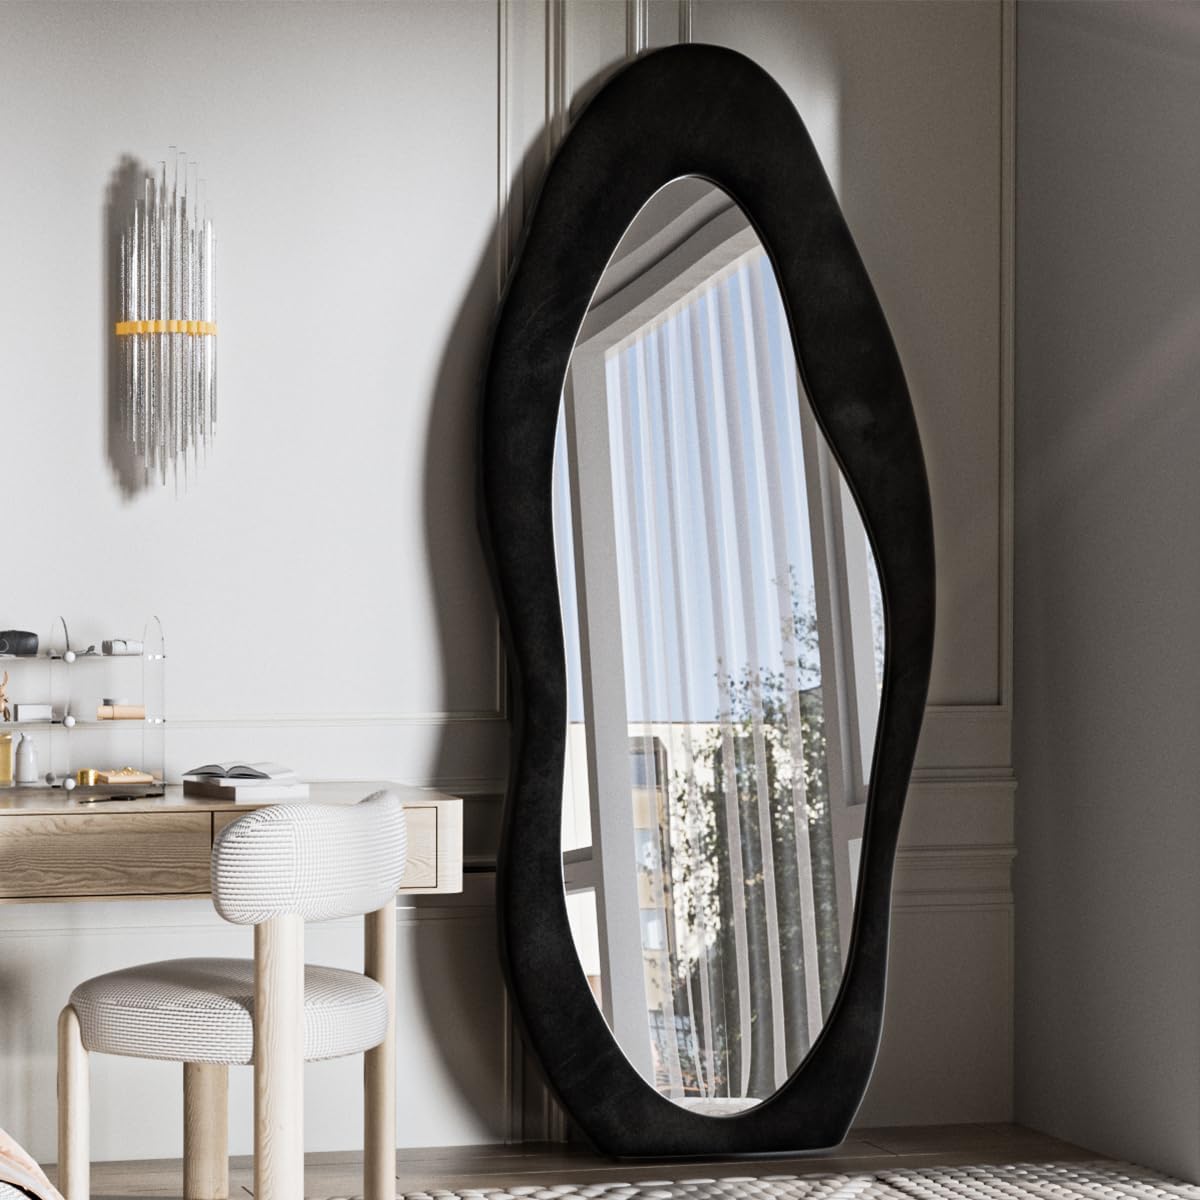 63"x24" Irregular Mirror Full Length, Flannel Cloud Floor Mirror with Stand - $90